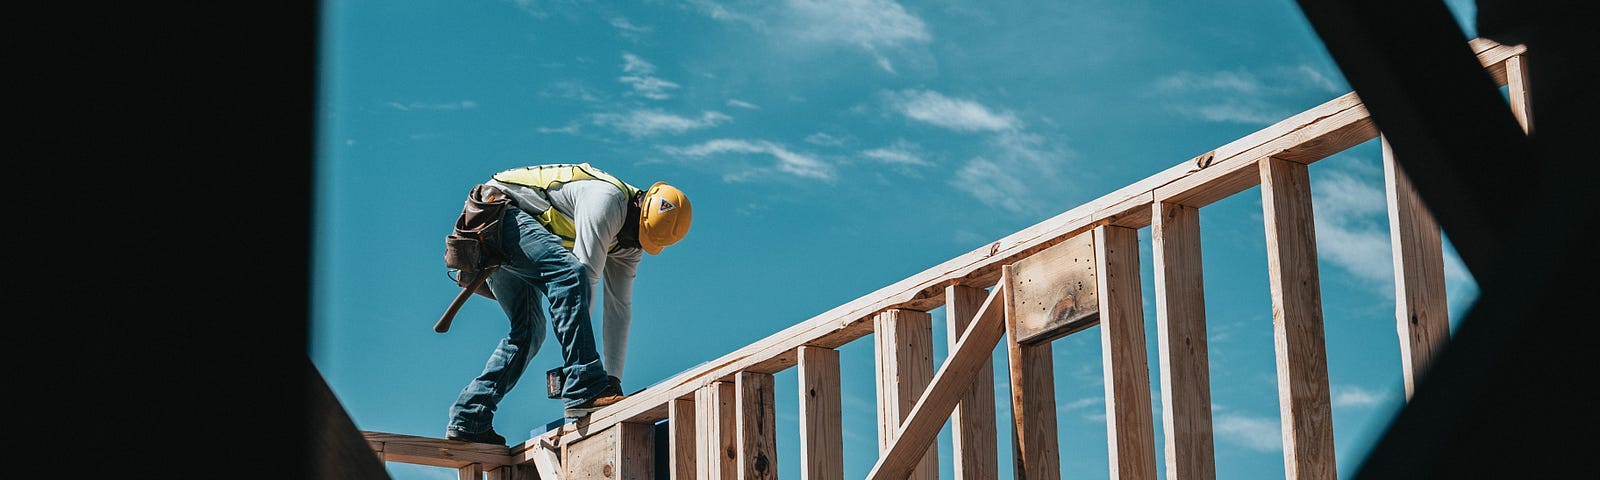 A construction worker wearing  jeans, a long sleeved light colored shirt, vest, hard hat, and tool belt stands atop a wooden frame of a building or house. They are bent over and working with a tool. Cross beams that are part of the construction are visible in the foreground of the picture.